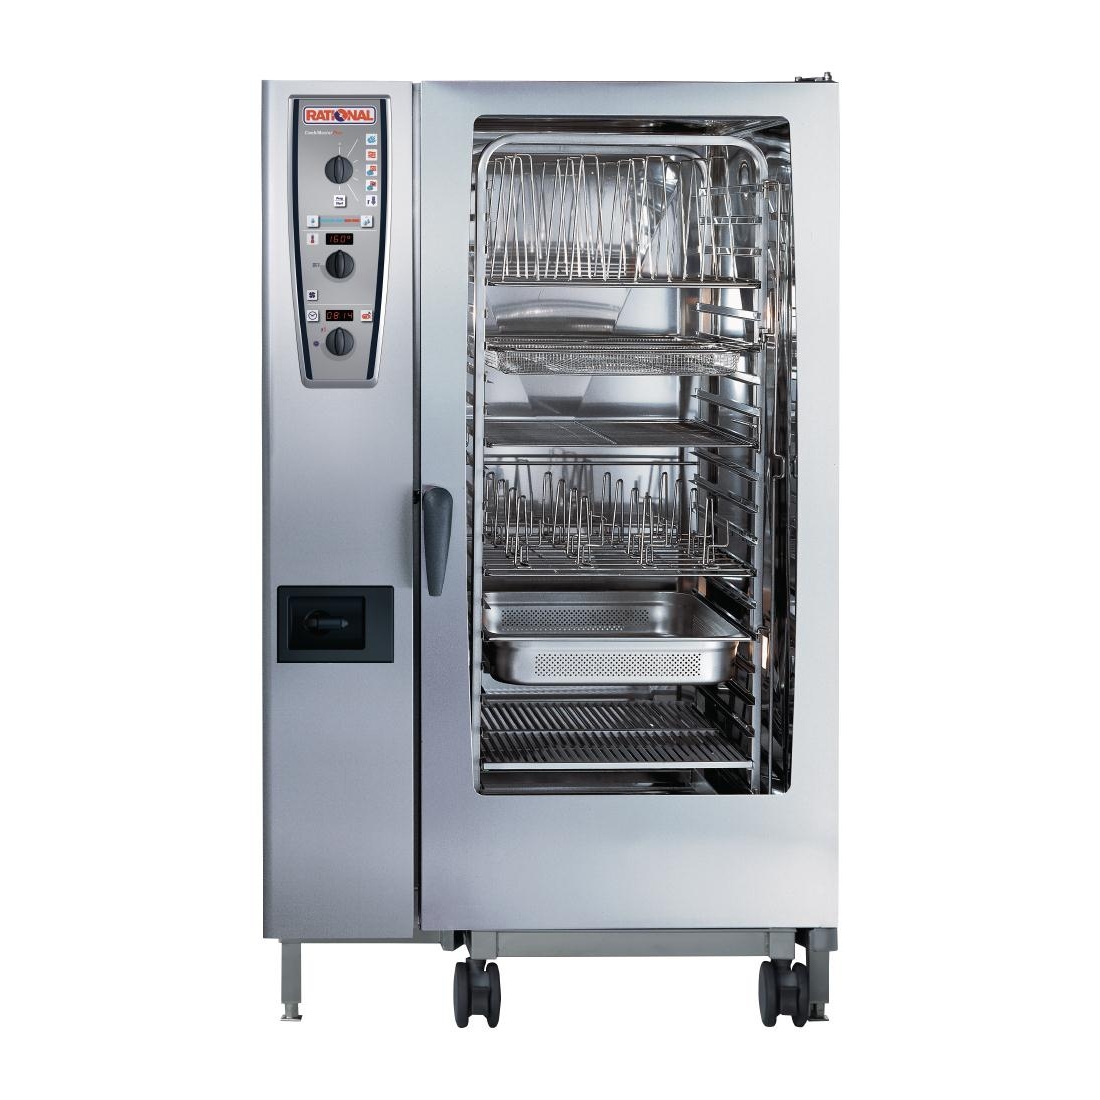 Rational Combimaster Plus Oven 202 Electric